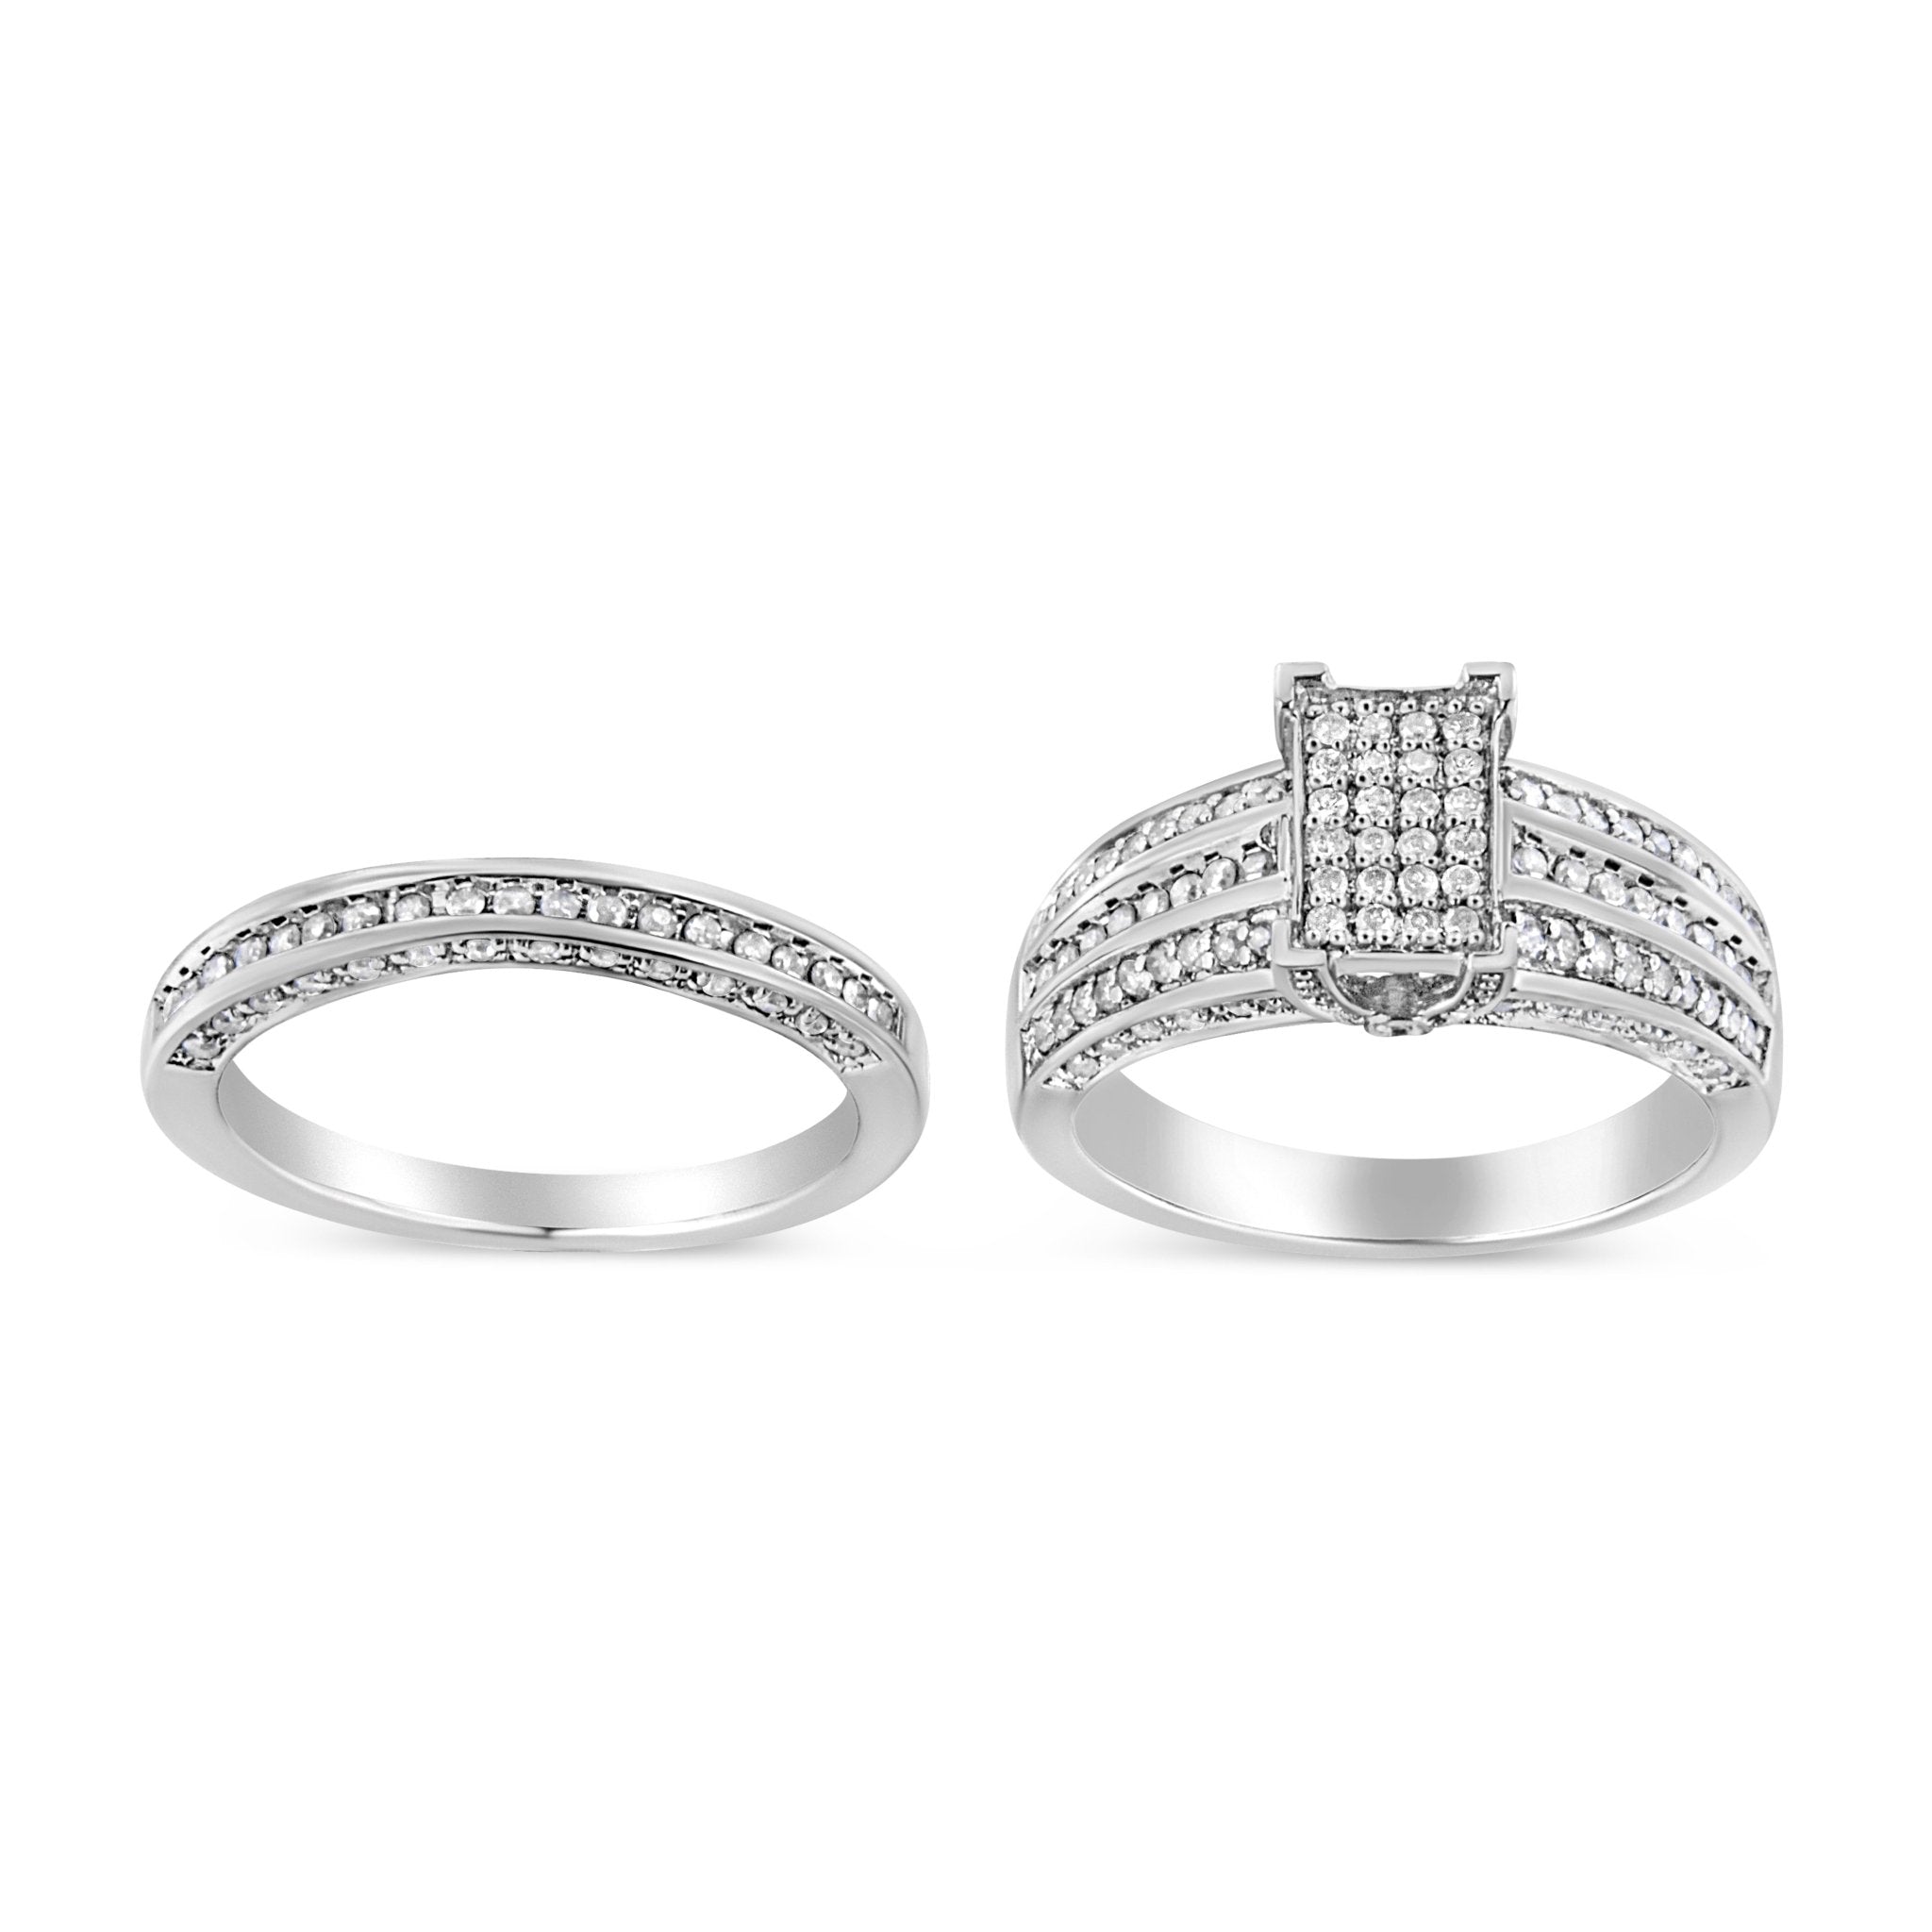 .925-Sterling-Silver-3/4-Cttw-Prong-Set-Round-Diamond-Composite-Engagement-Ring-And-Band-Set-(I-J-Color,-I3-Clarity)-Size-8-Rings